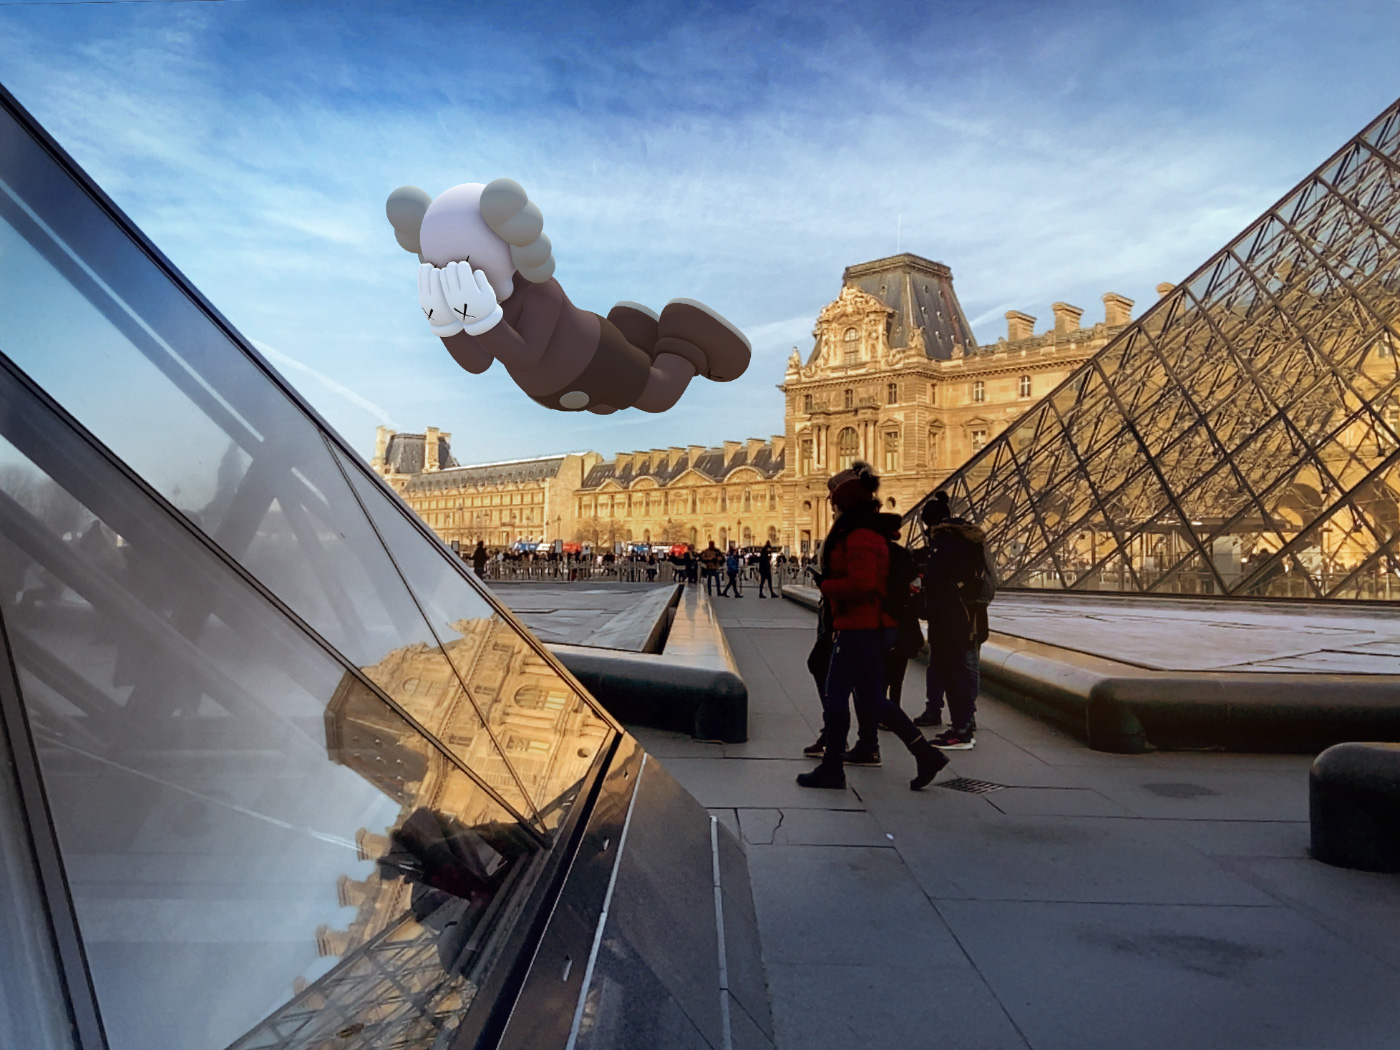 A KAWS bear floating above buildings and two people